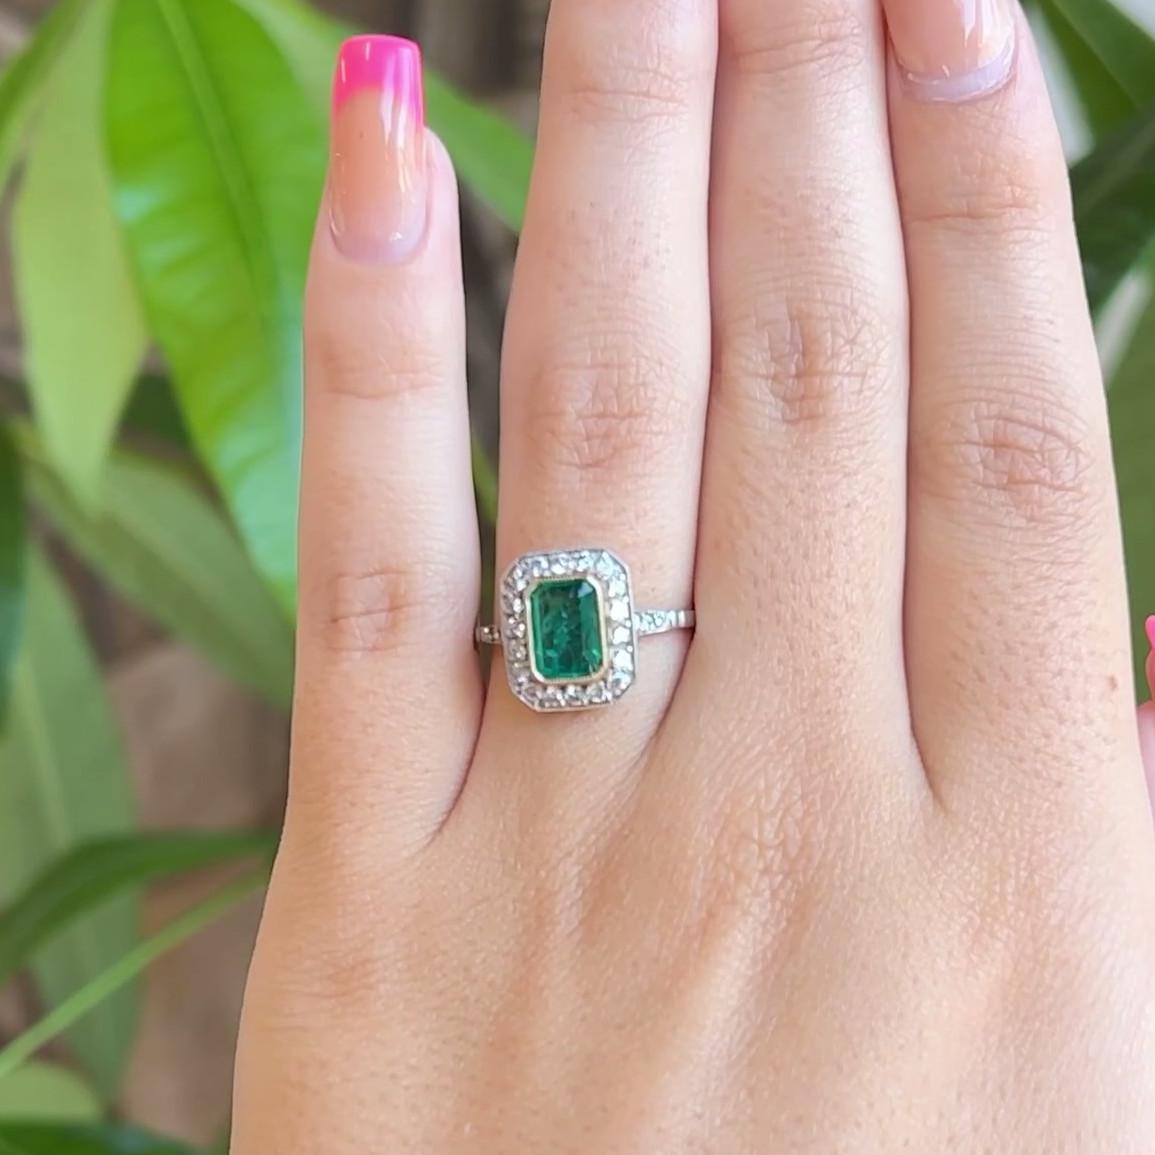 One Art Deco Inspired Emerald Diamond Platinum Ring. Featuring one rectangular step cut emerald of 0.77 carat. Accented by 24 round brilliant cut diamonds with a total weight of approximately 0.40 carat, graded near-colorless, VS-SI clarity. Crafted